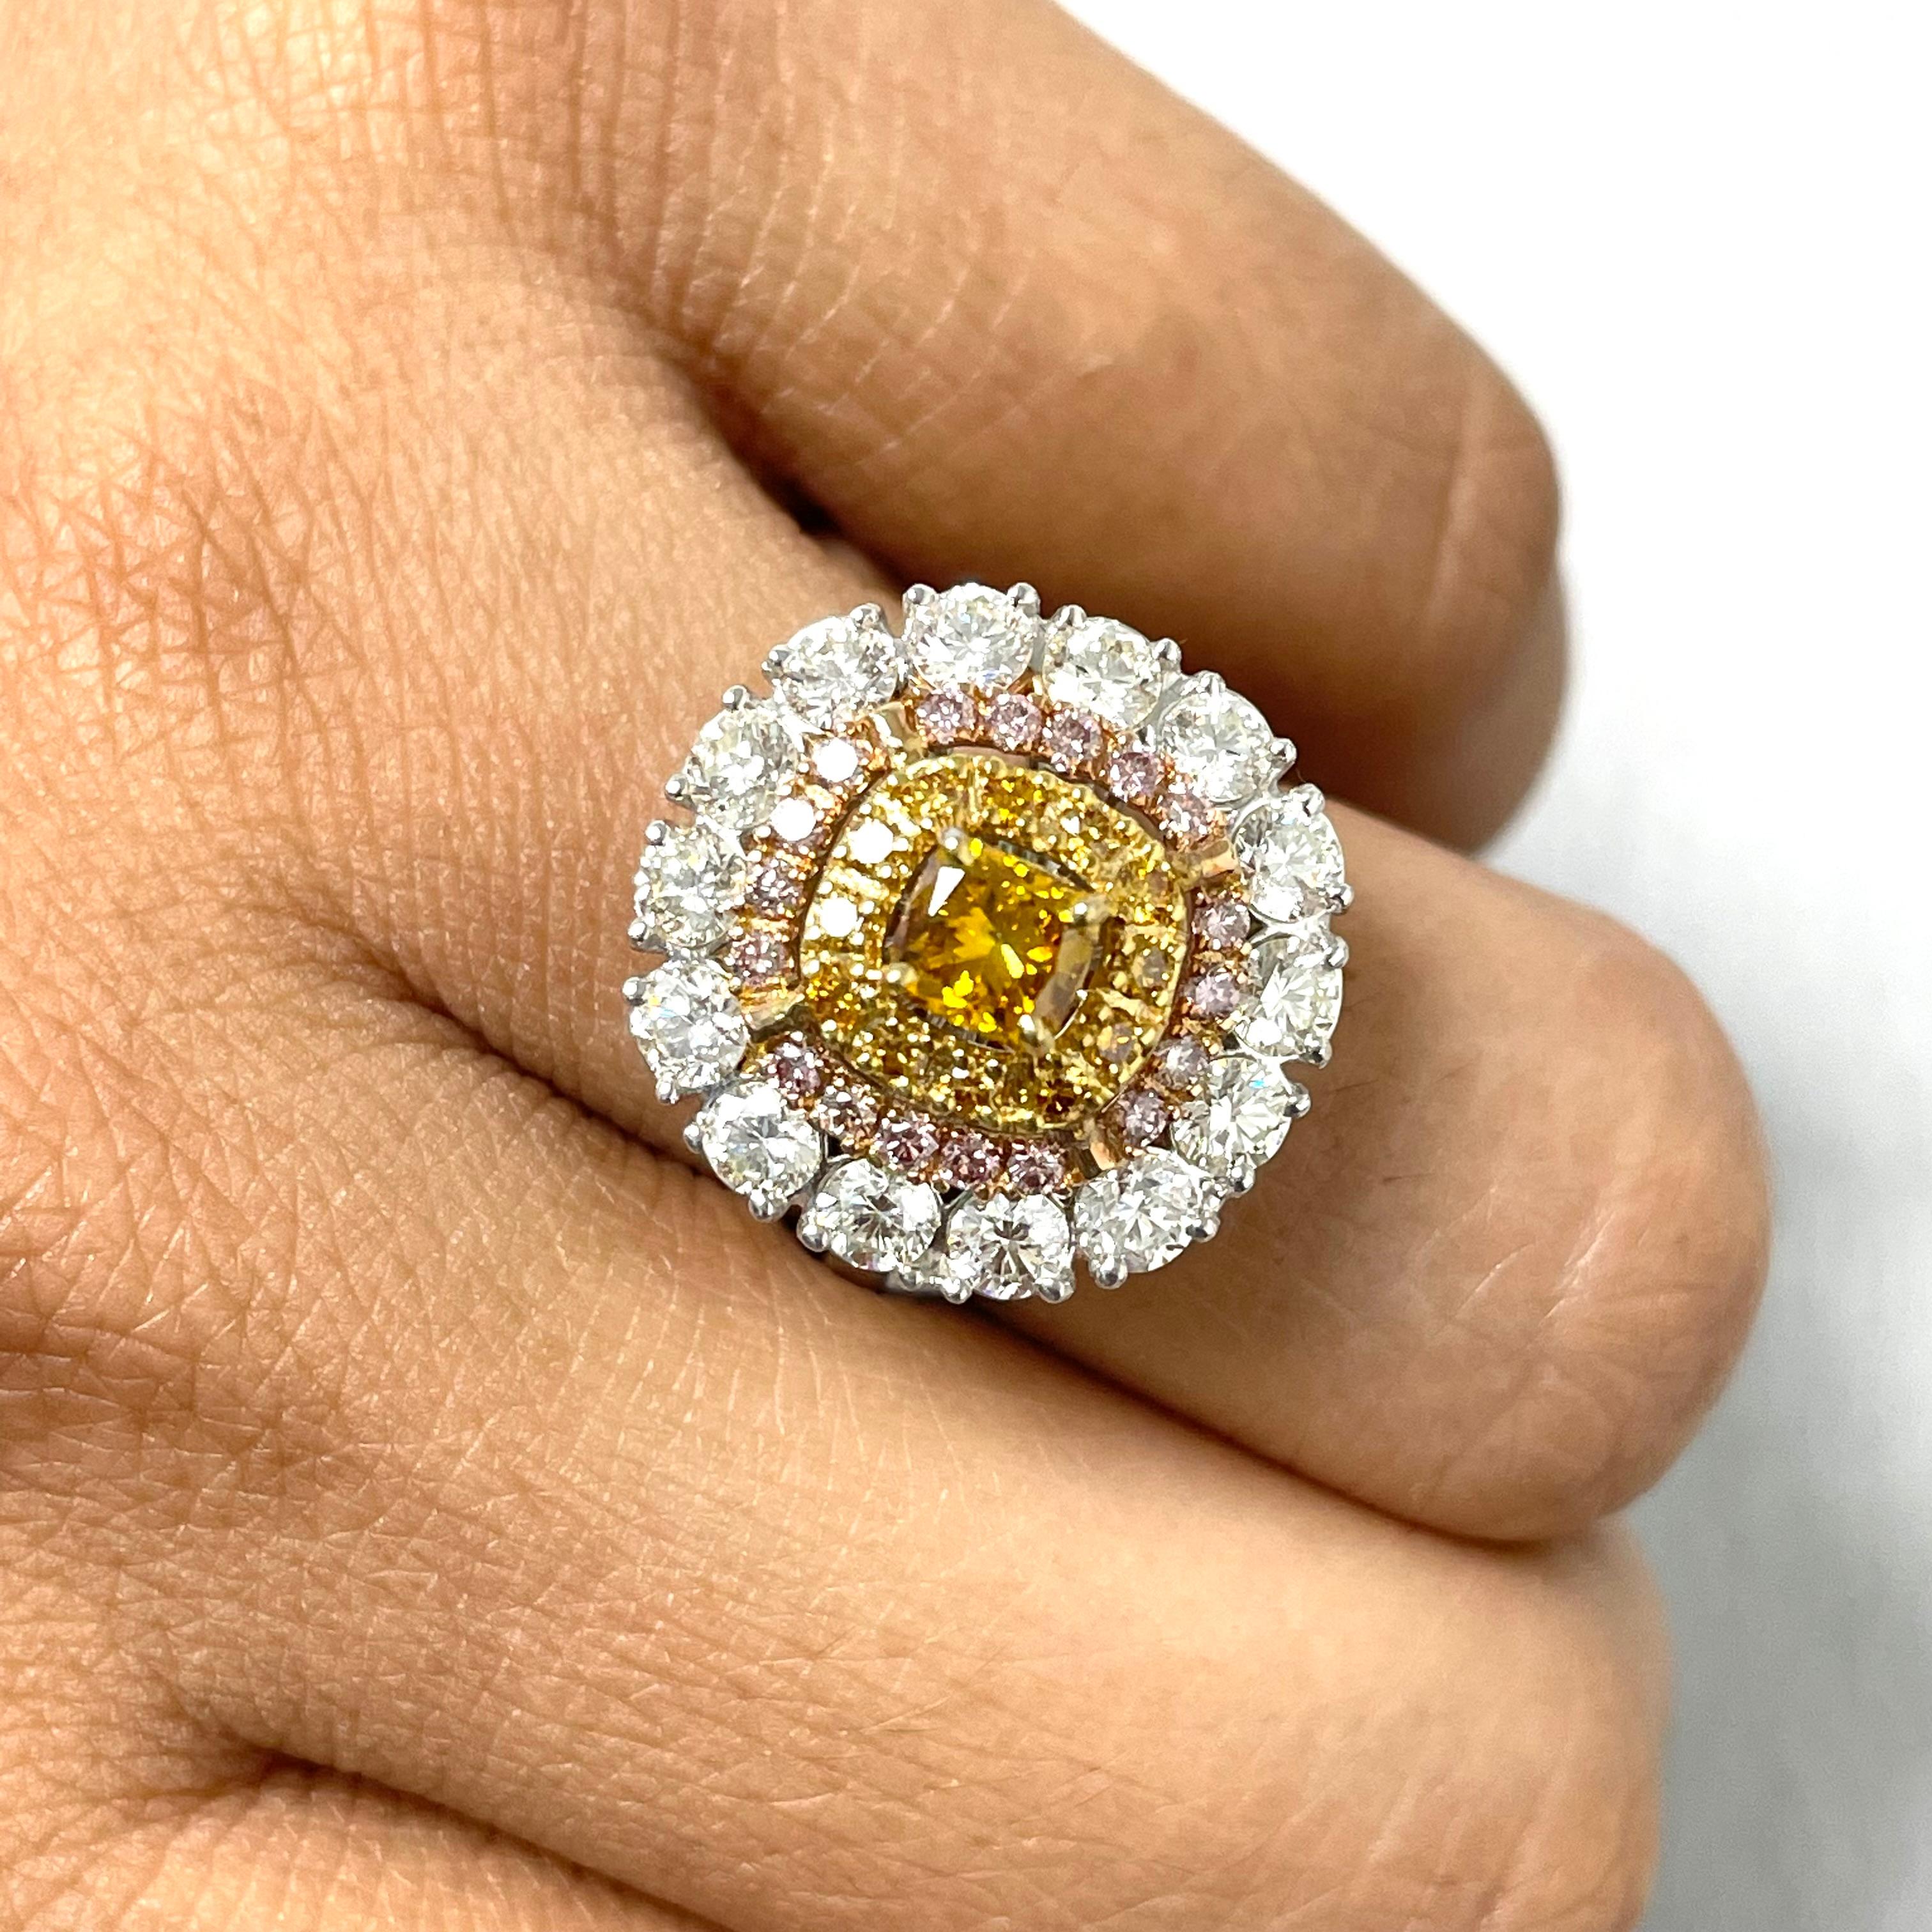 The Sun Diamond Cocktail Ring is a stunning ball of fire with its yellow orange center and concentric halos of orange, pink and white diamonds. It is a absolute showstopper.

Center Diamond Shape: Radiant
Center Diamond Weight: 0.53 ct 
Diamond